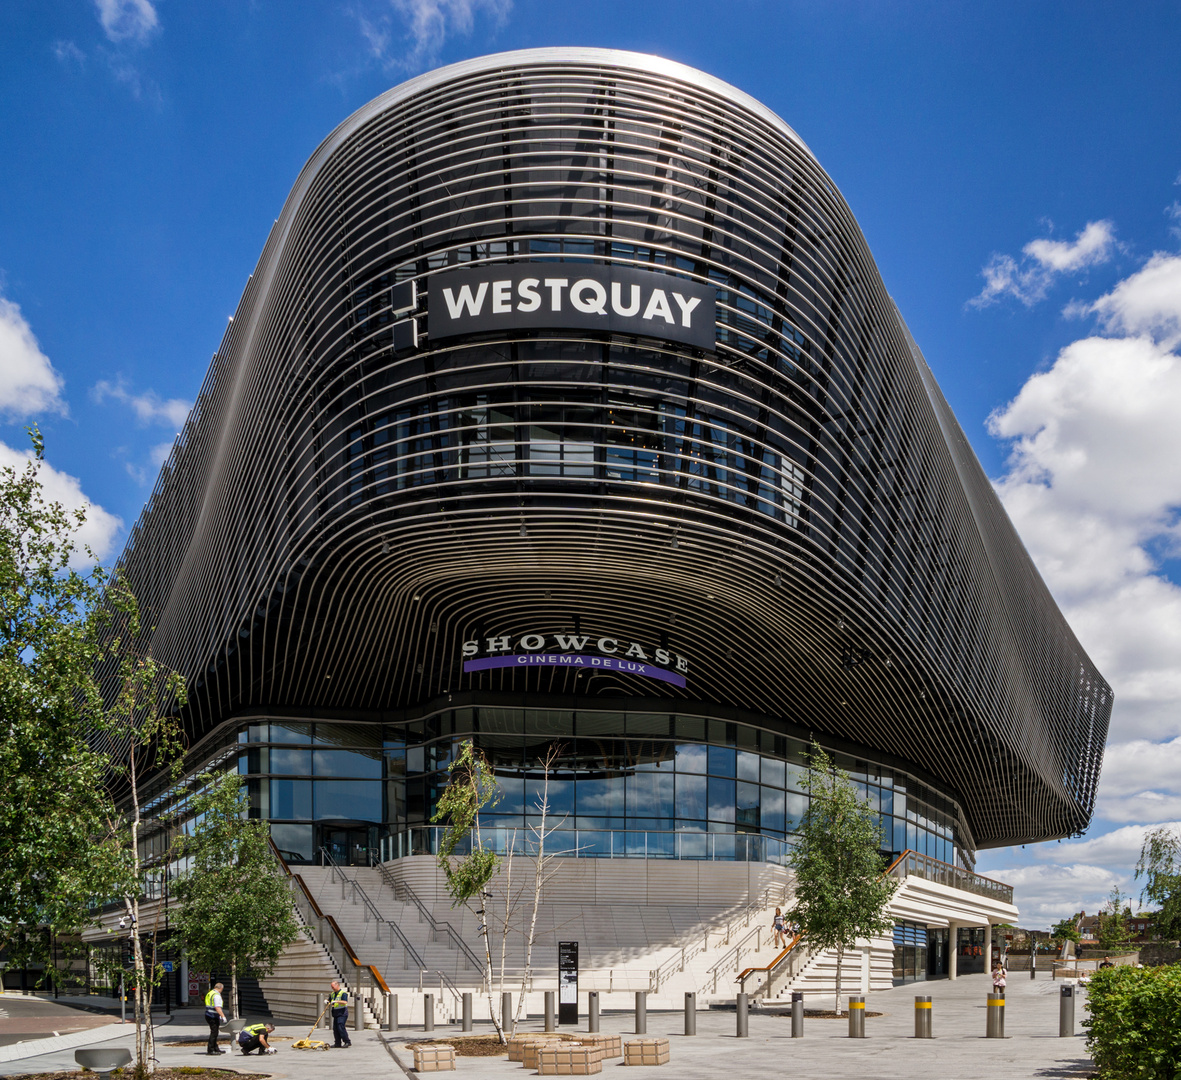 The Westquay